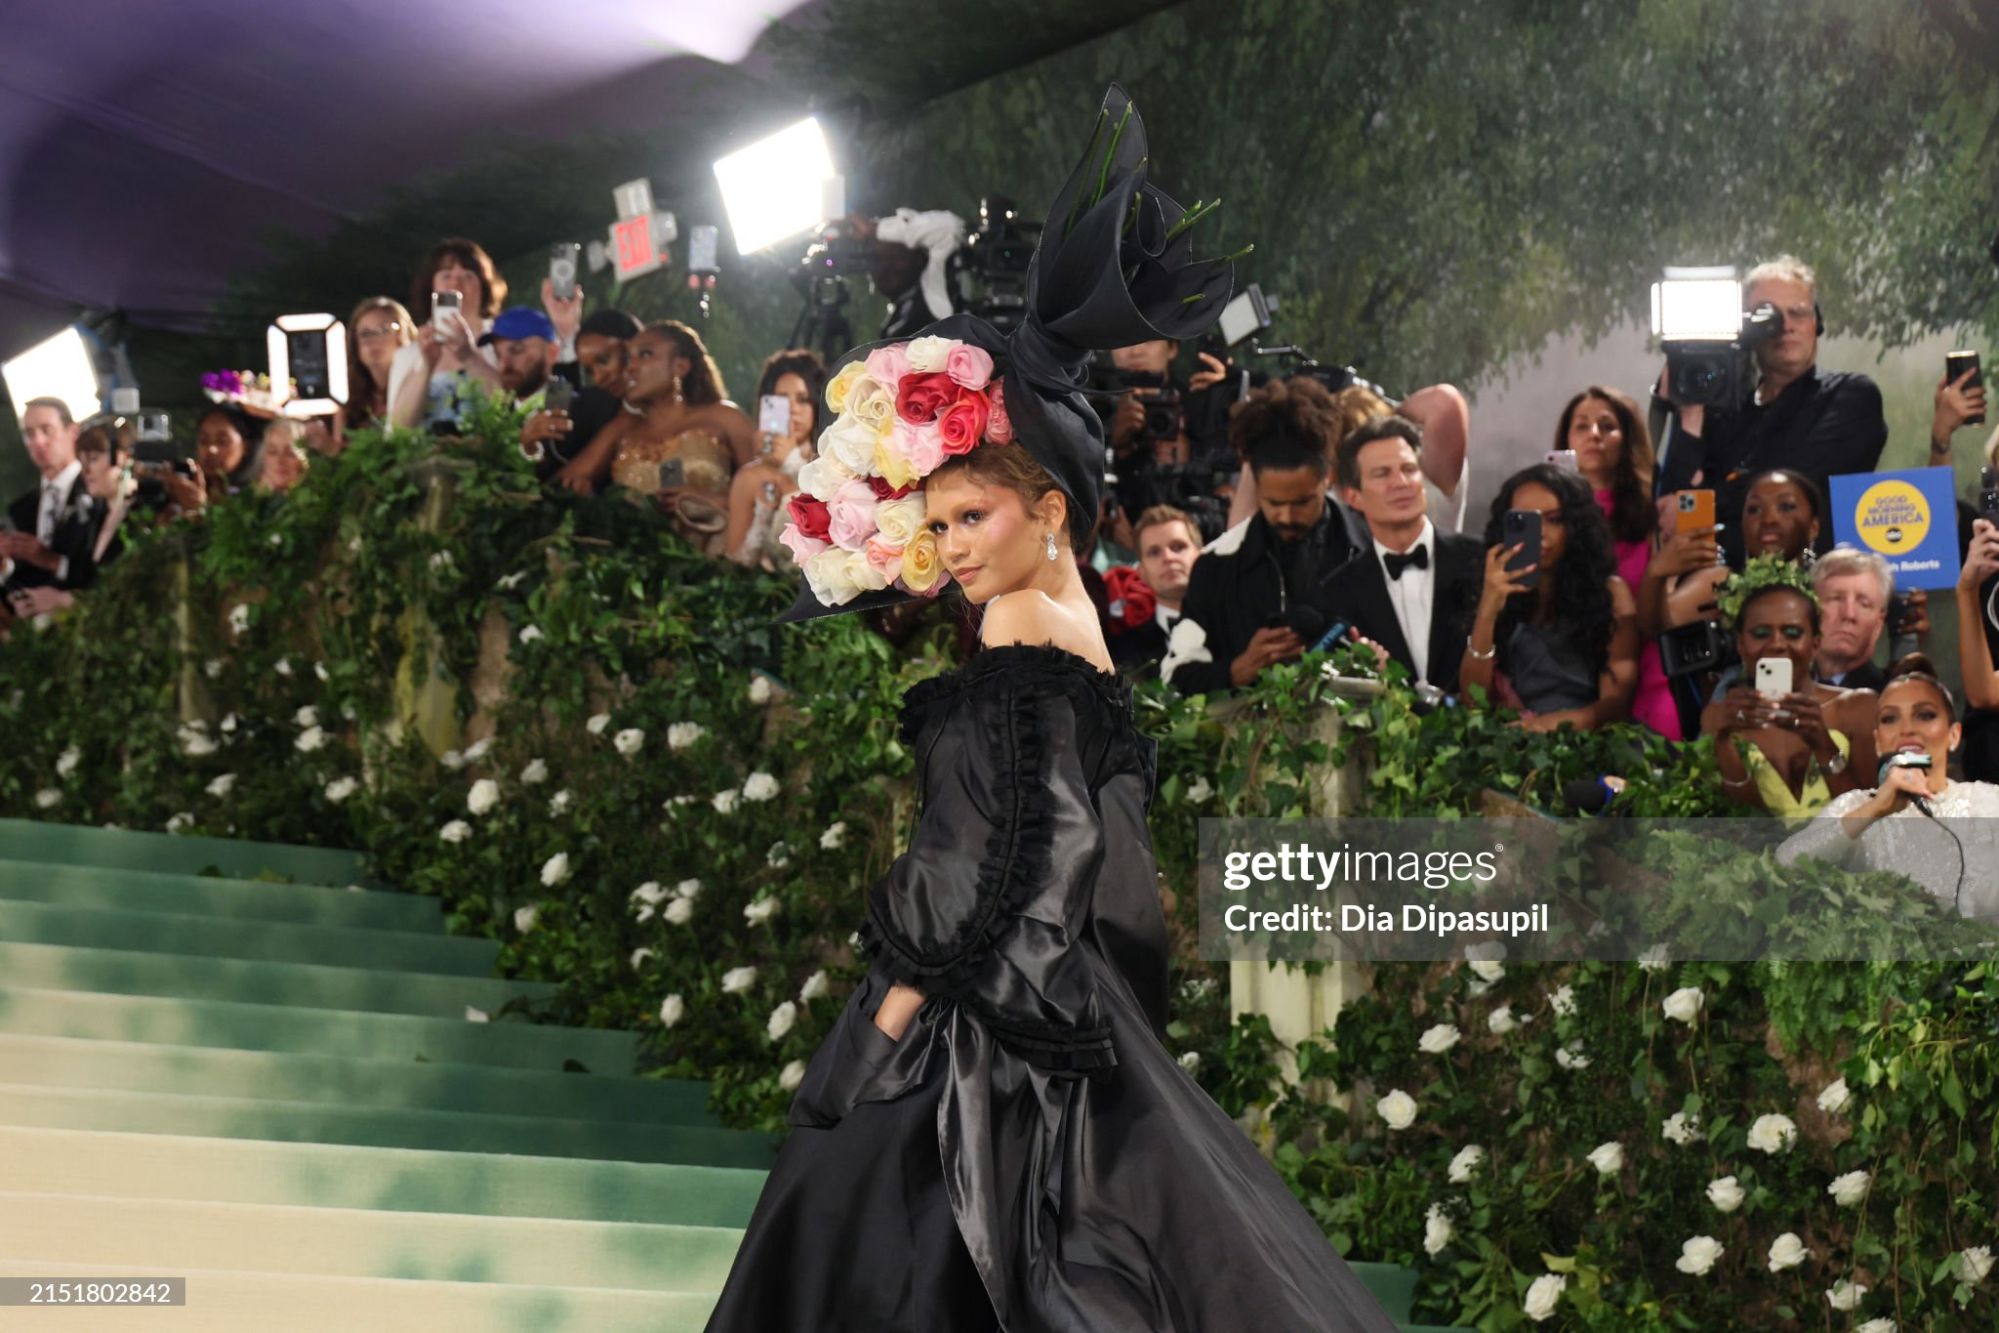 gettyimages-2151802842-2048x2048.jpg